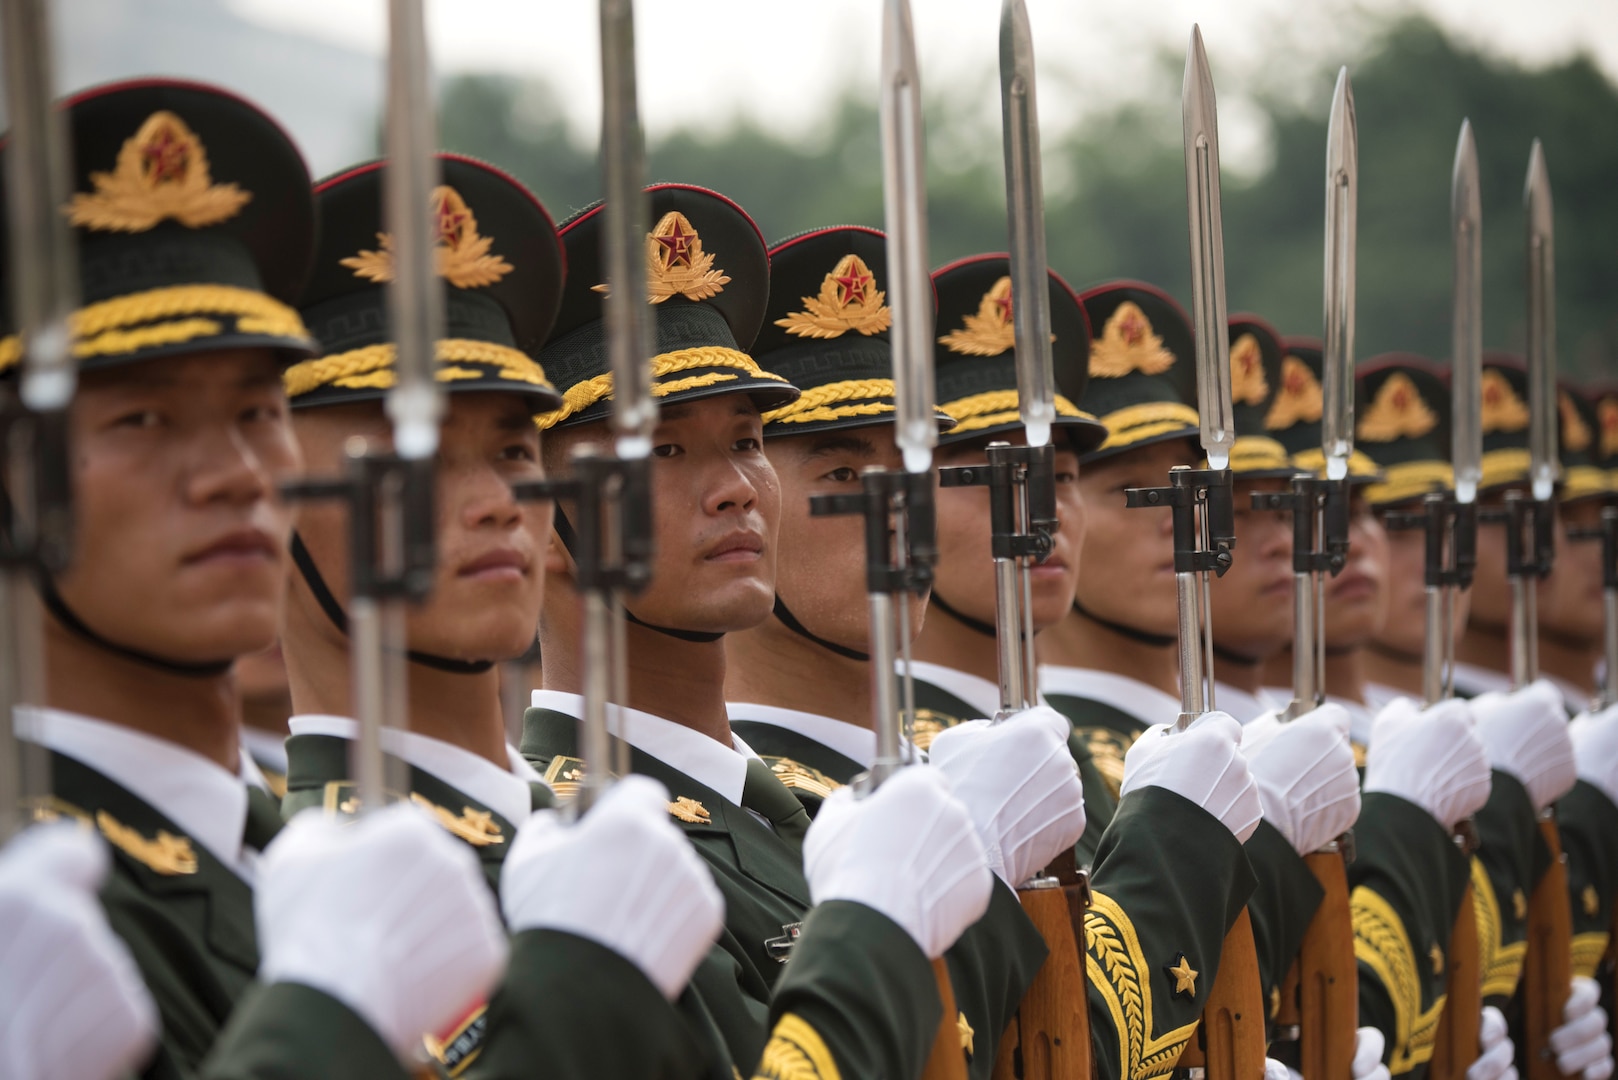 People’s Liberation Army soldiers participate in a welcome ceremony during a meeting between then–Chairman of the Joint Chiefs of Staff Joseph F. Dunford, Jr., and his Chinese counterpart, General Fang Fenghui, at the Ba Yi, August 15, 2017 (DOD/Dominique A. Pineiro)